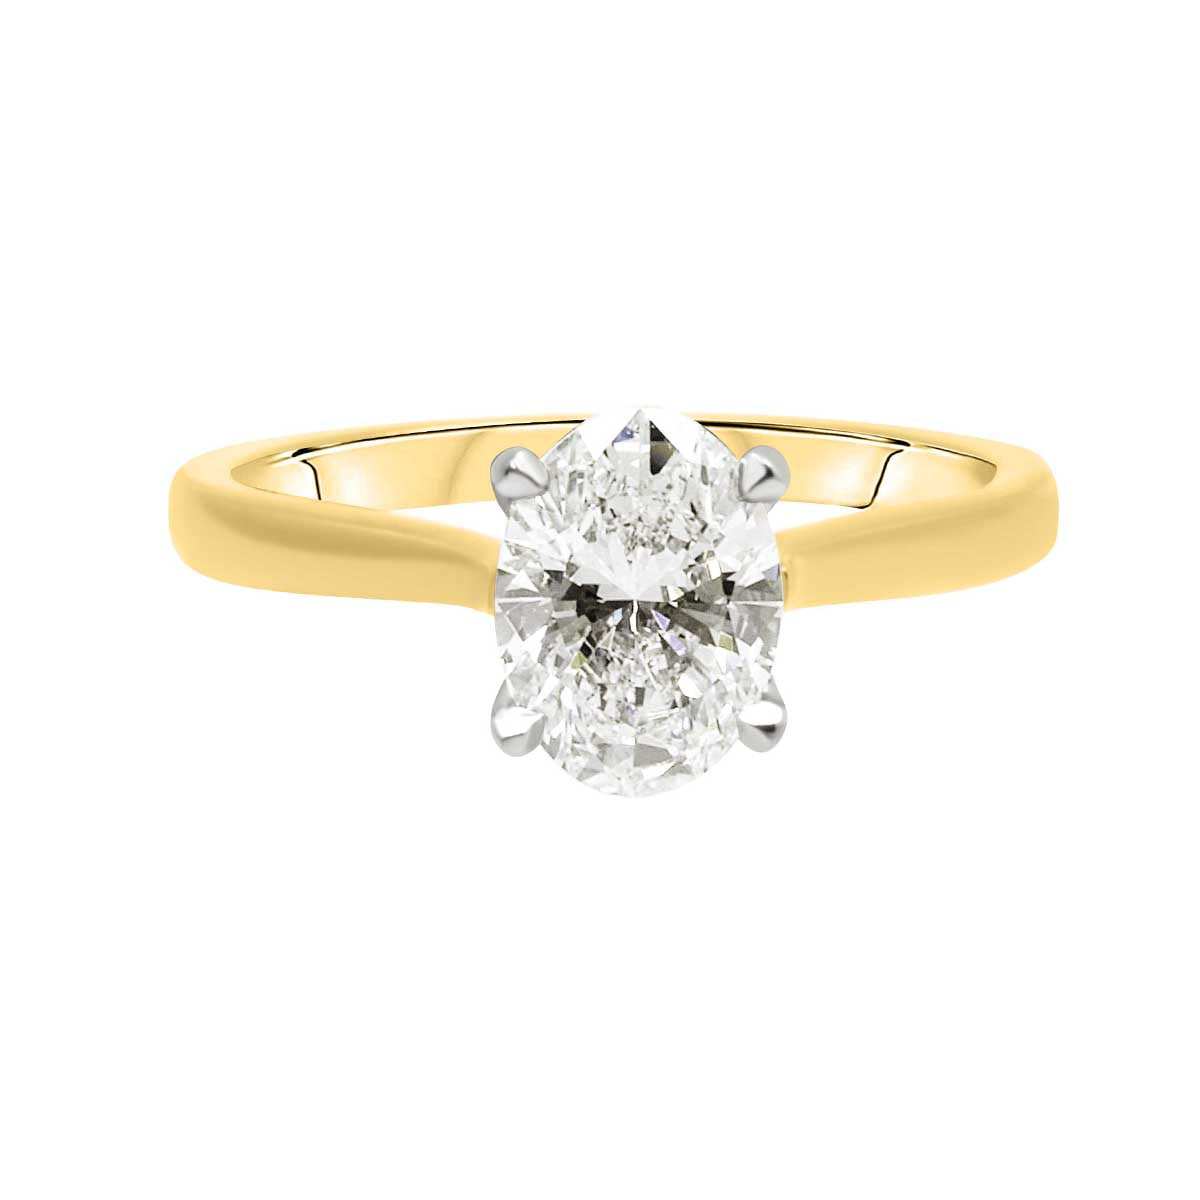 Tulip Setting Oval Solitaire in yellow gold laying flat